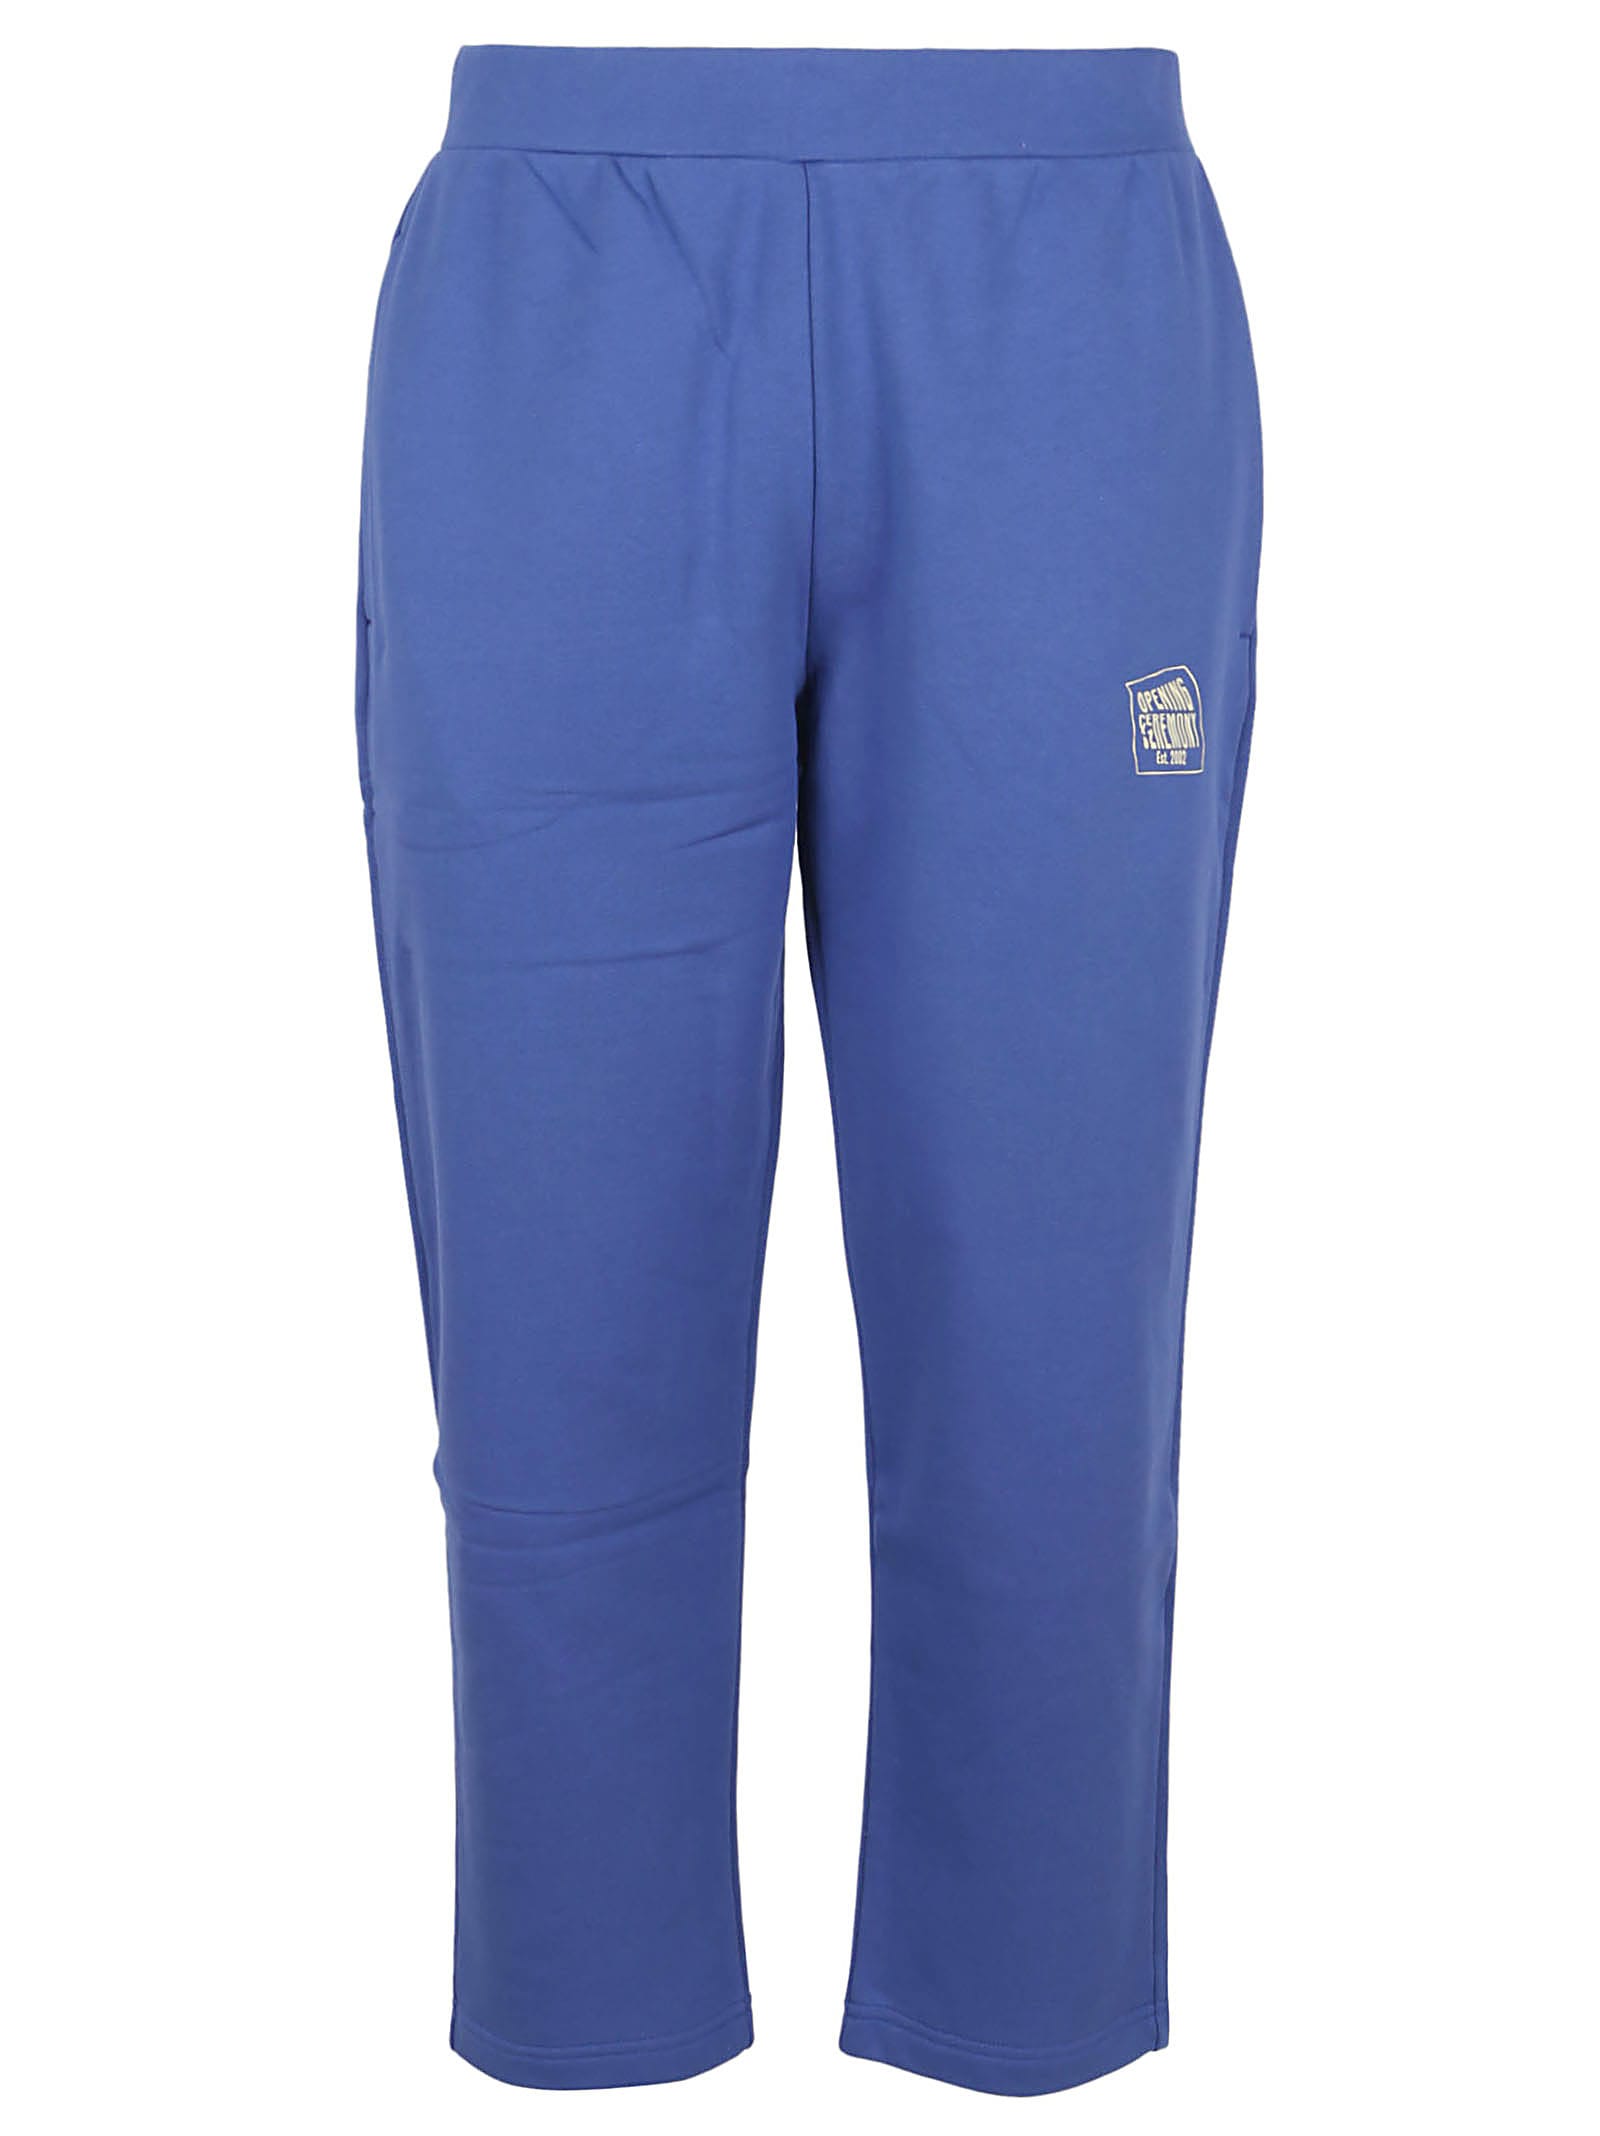 OPENING CEREMONY SMALL WARPED LOGO SWEATPANT,YMCH003S21FL.E002 4701 COBALT WHIT